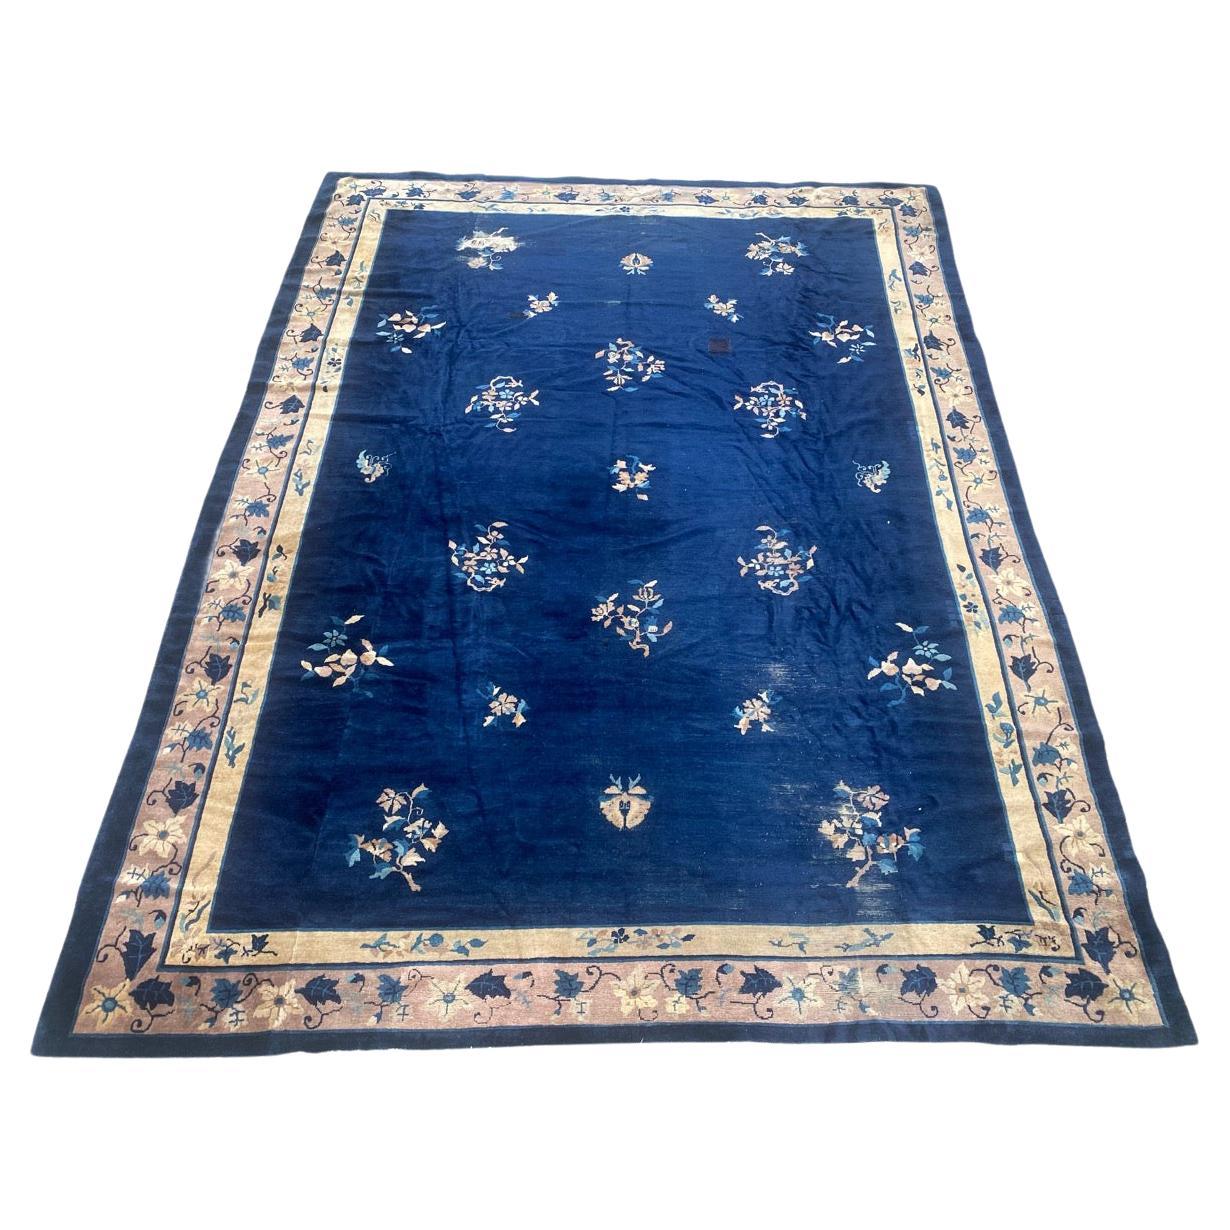 Bobyrug’s Pretty Large Antique Chinese Art Deco Rug For Sale